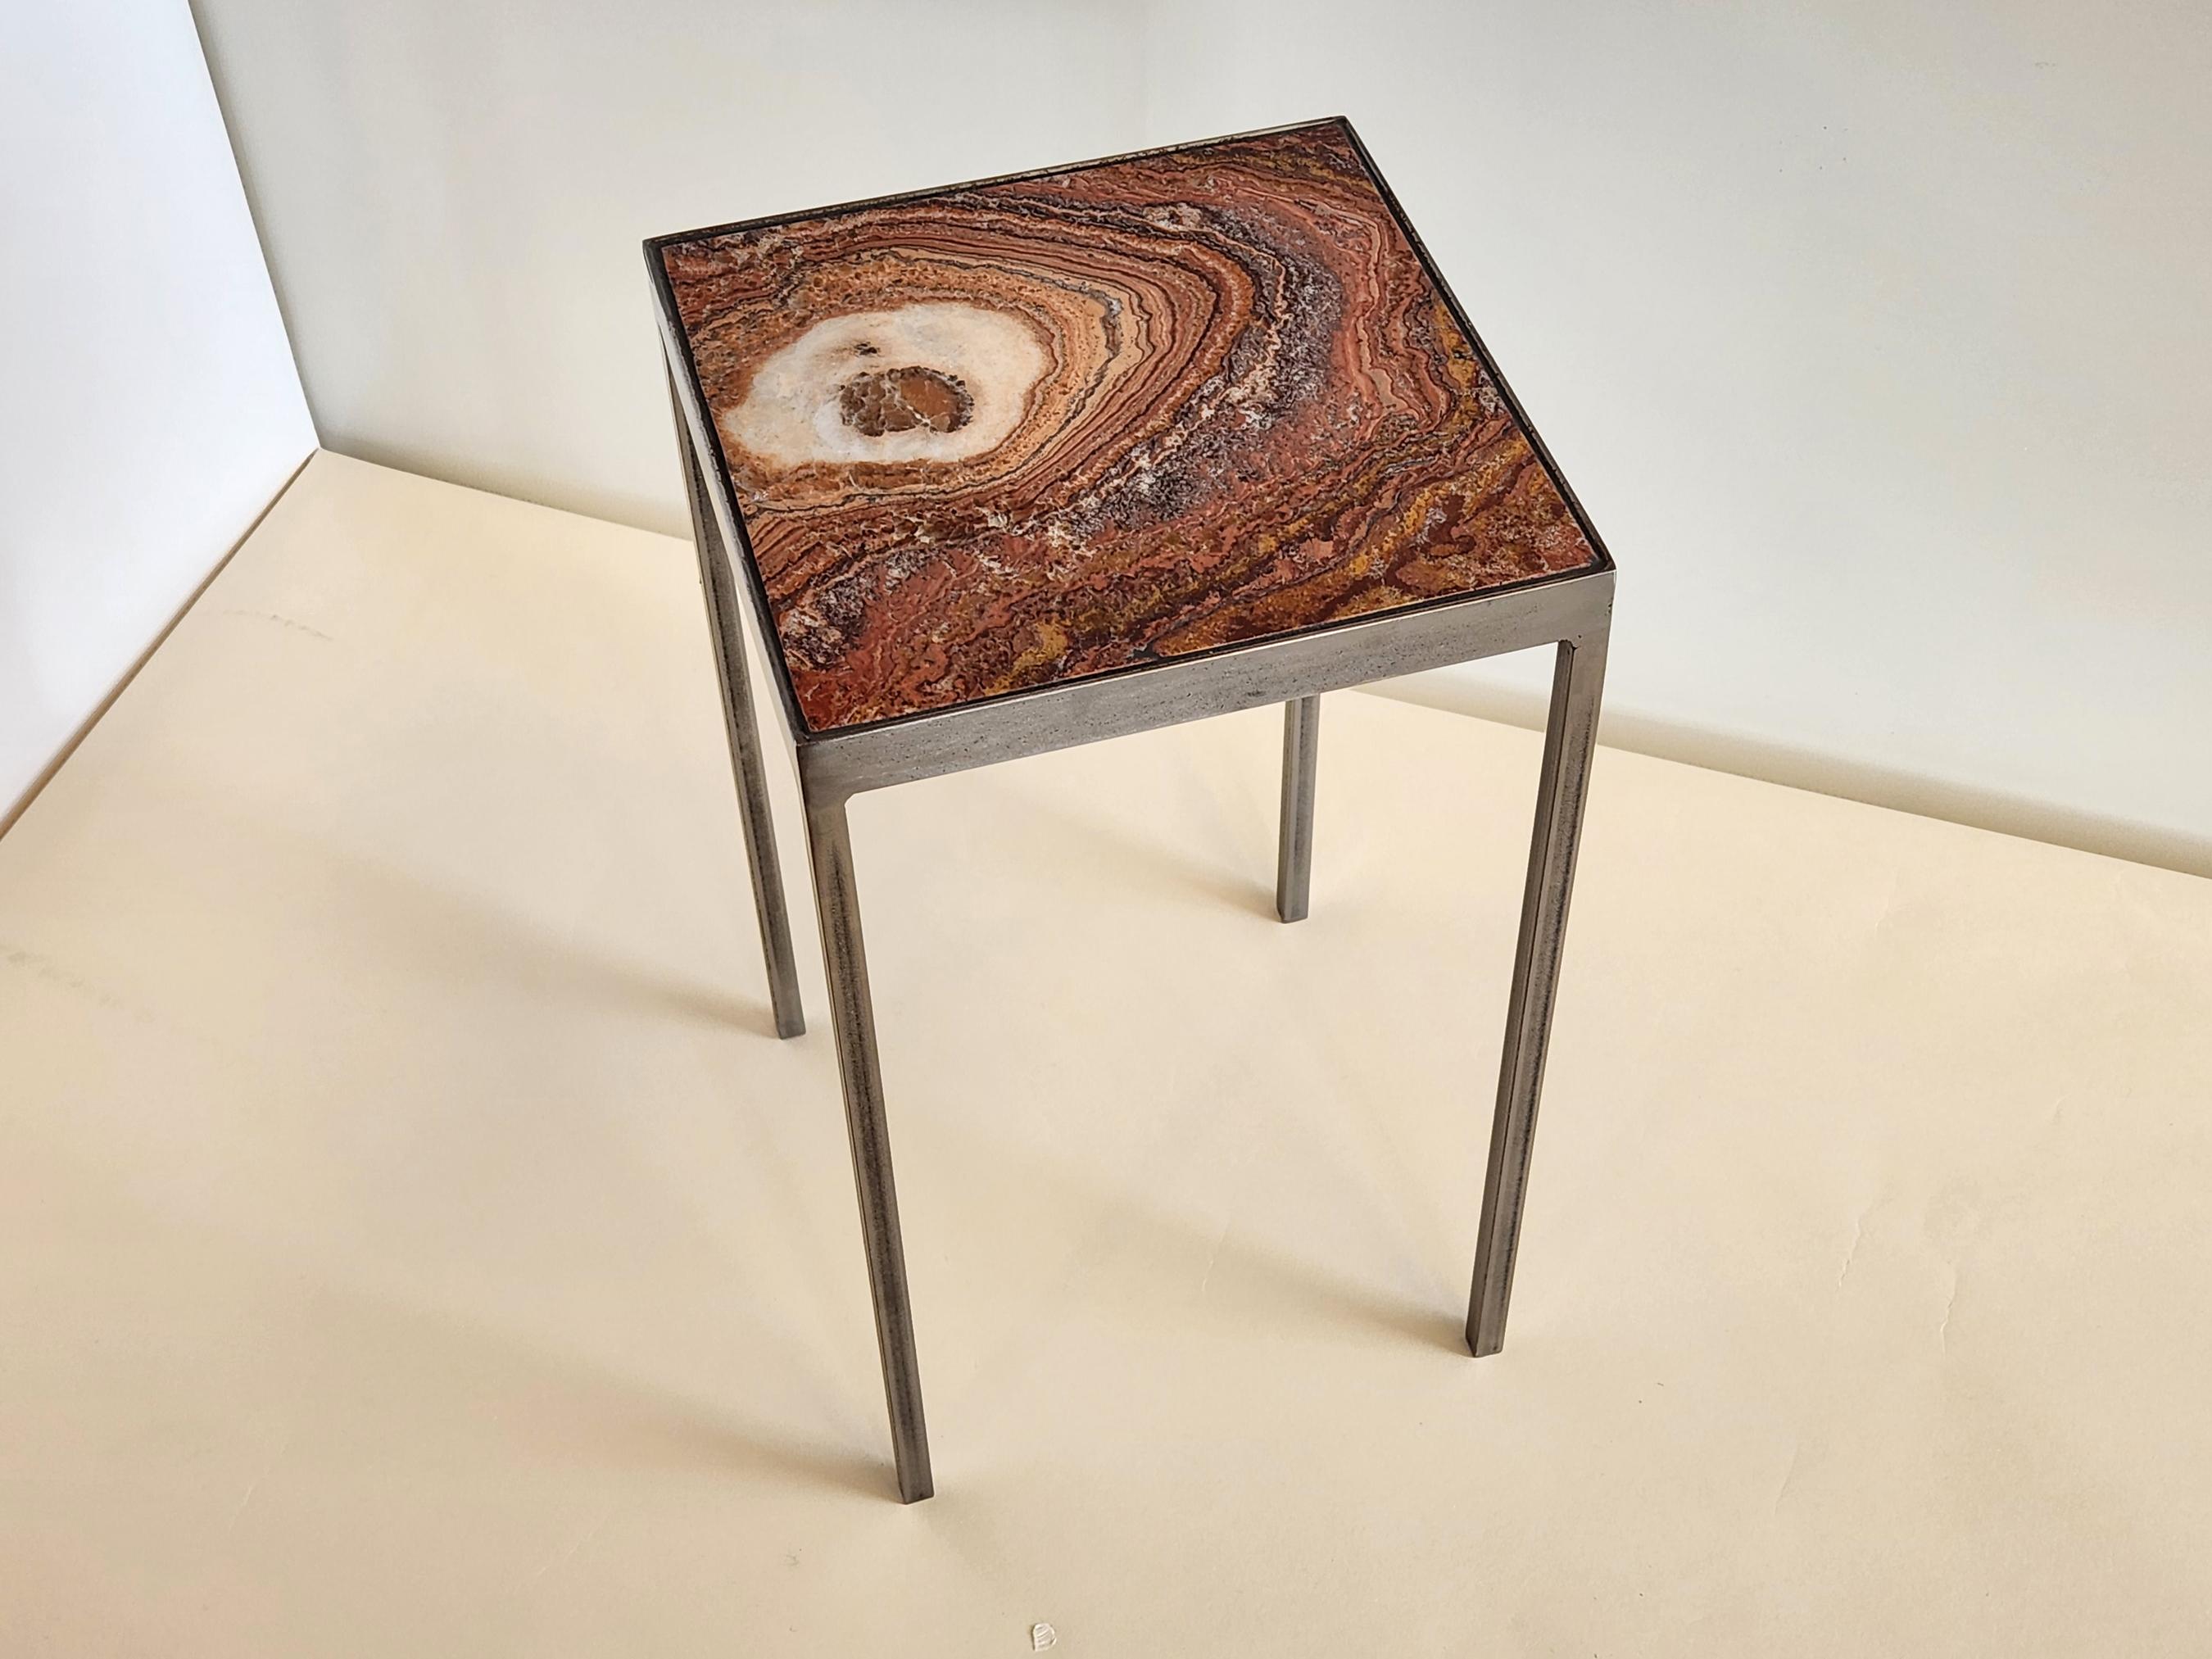 Mid-Century Modern Elegant Side Table with an Onyx Tile by Gueridon Designs For Sale